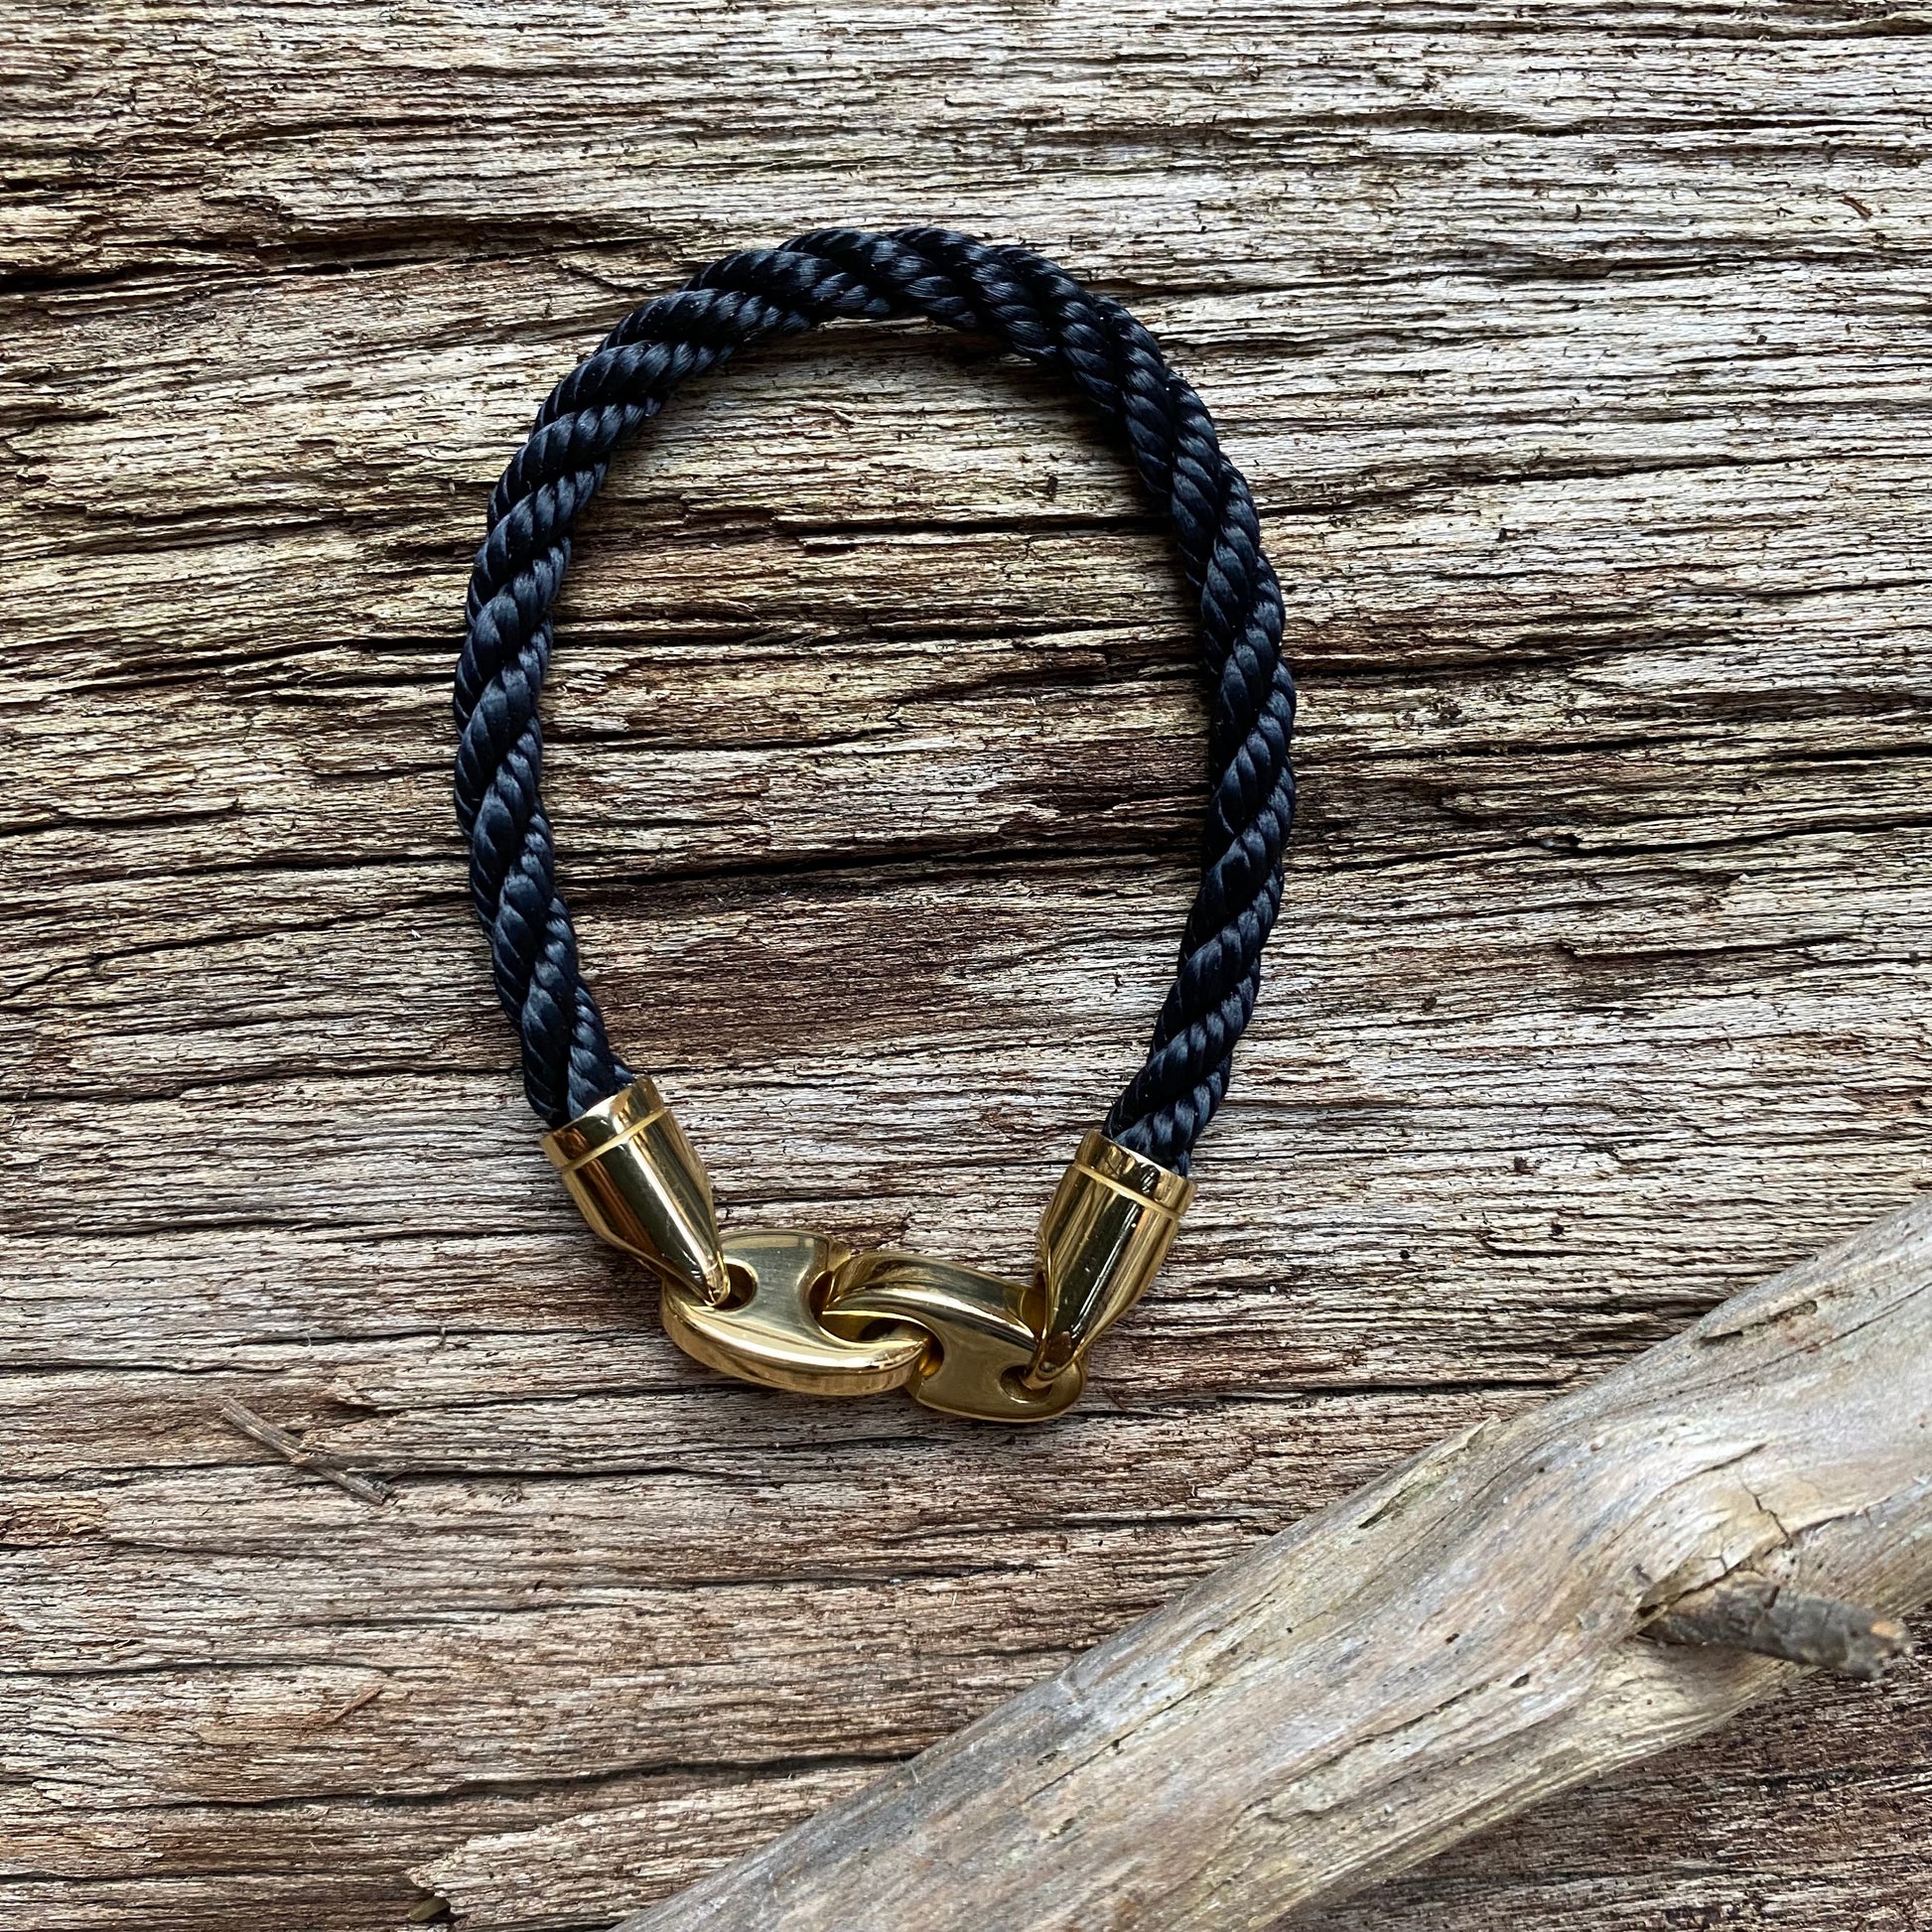 3 methods for attaching a lobster clasp